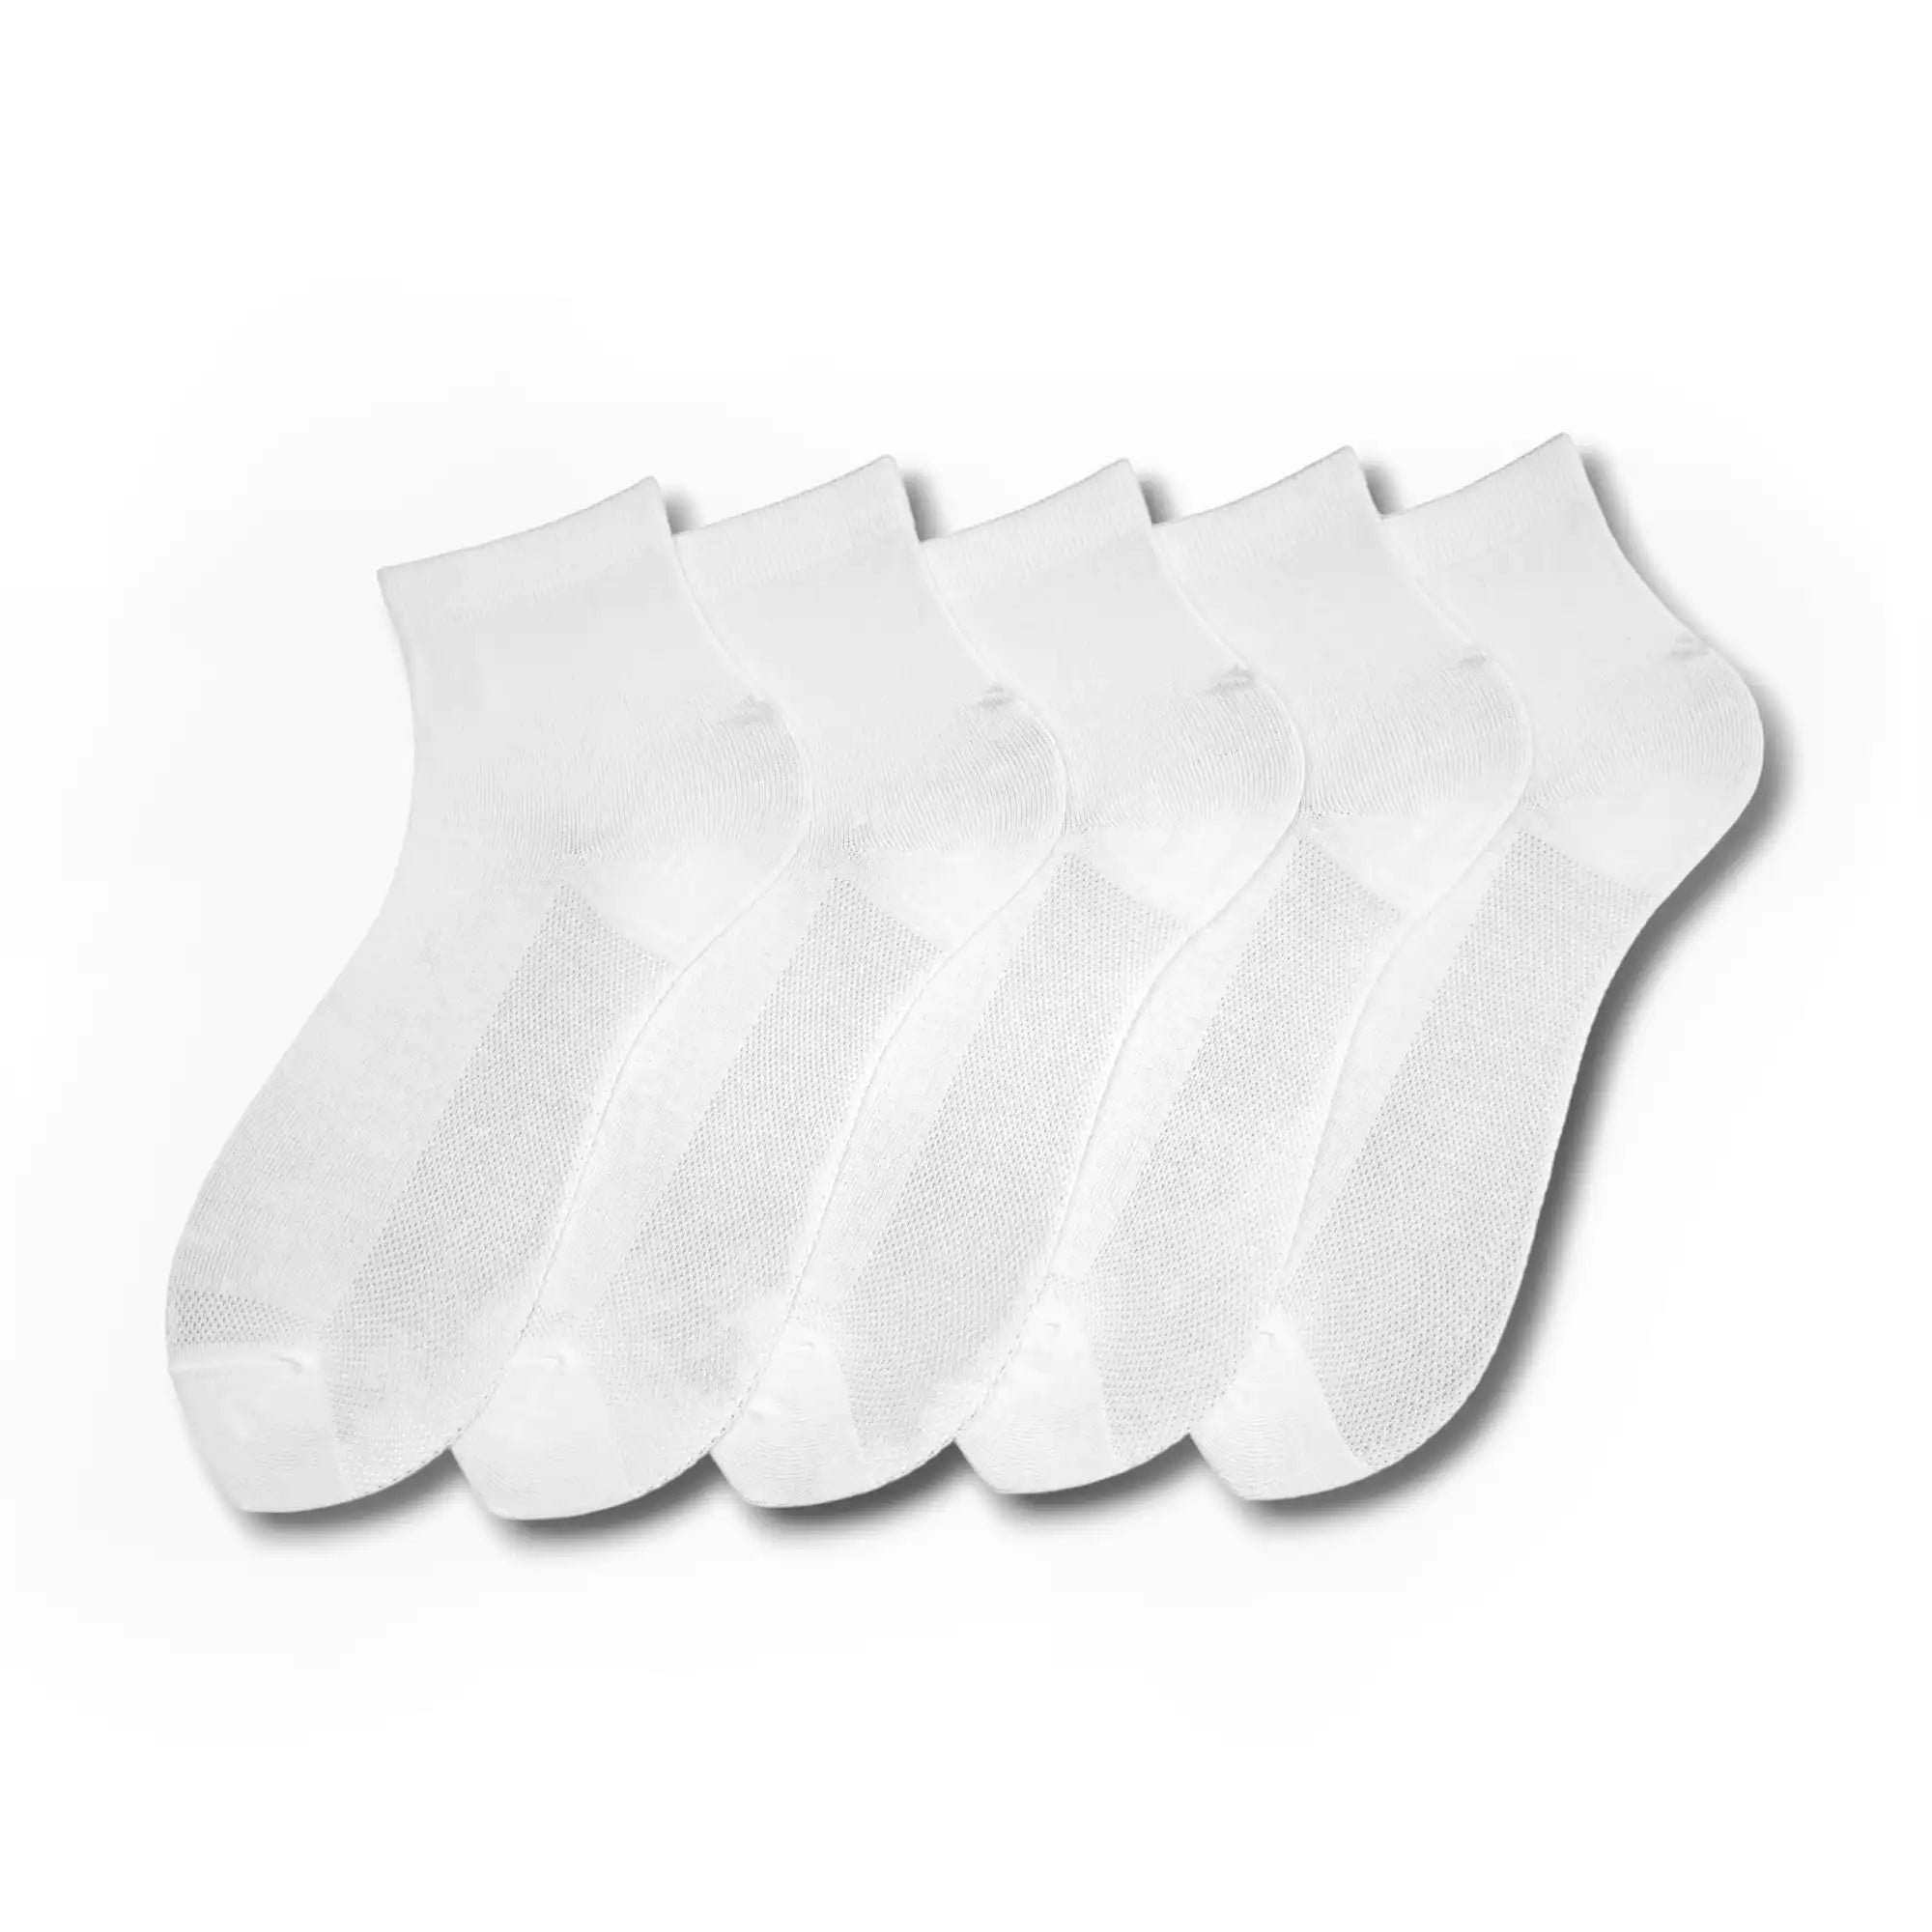 Young Wings Men's White Colour Cotton Fabric Solid Ankle Length Socks - Pack of 5, Style no. M1-2143 N